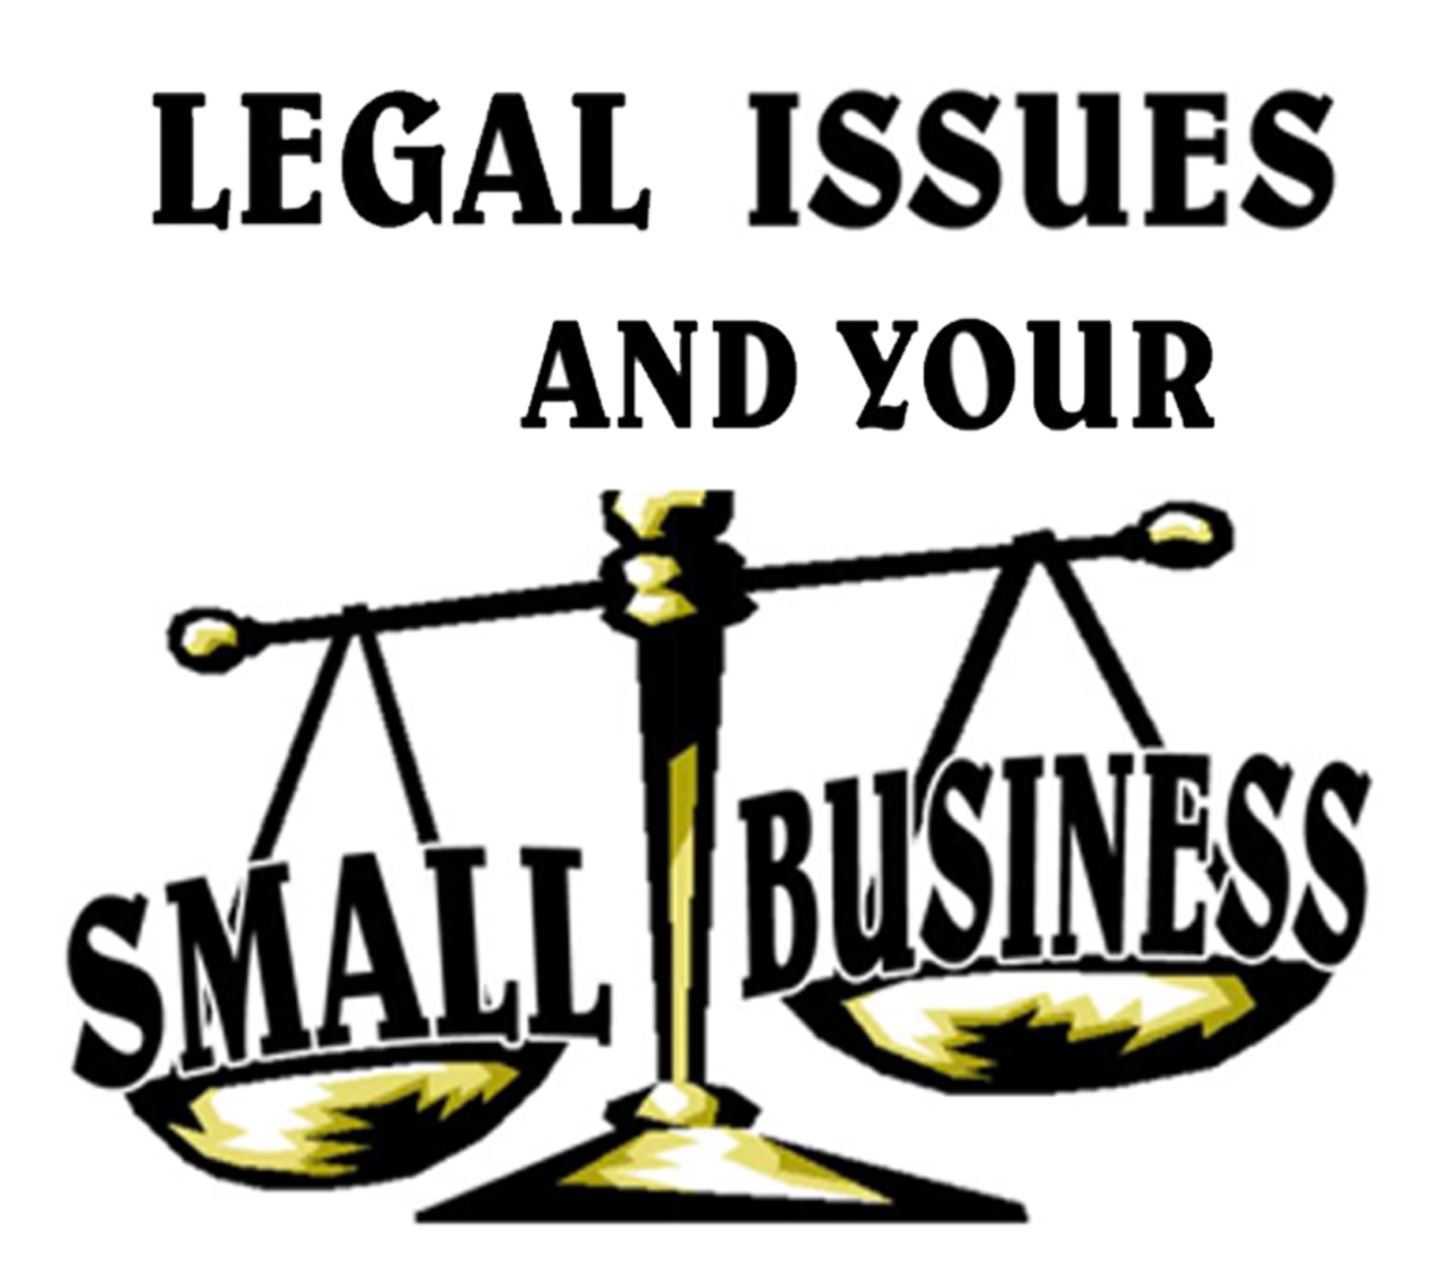 Legal to Business. Legal issues